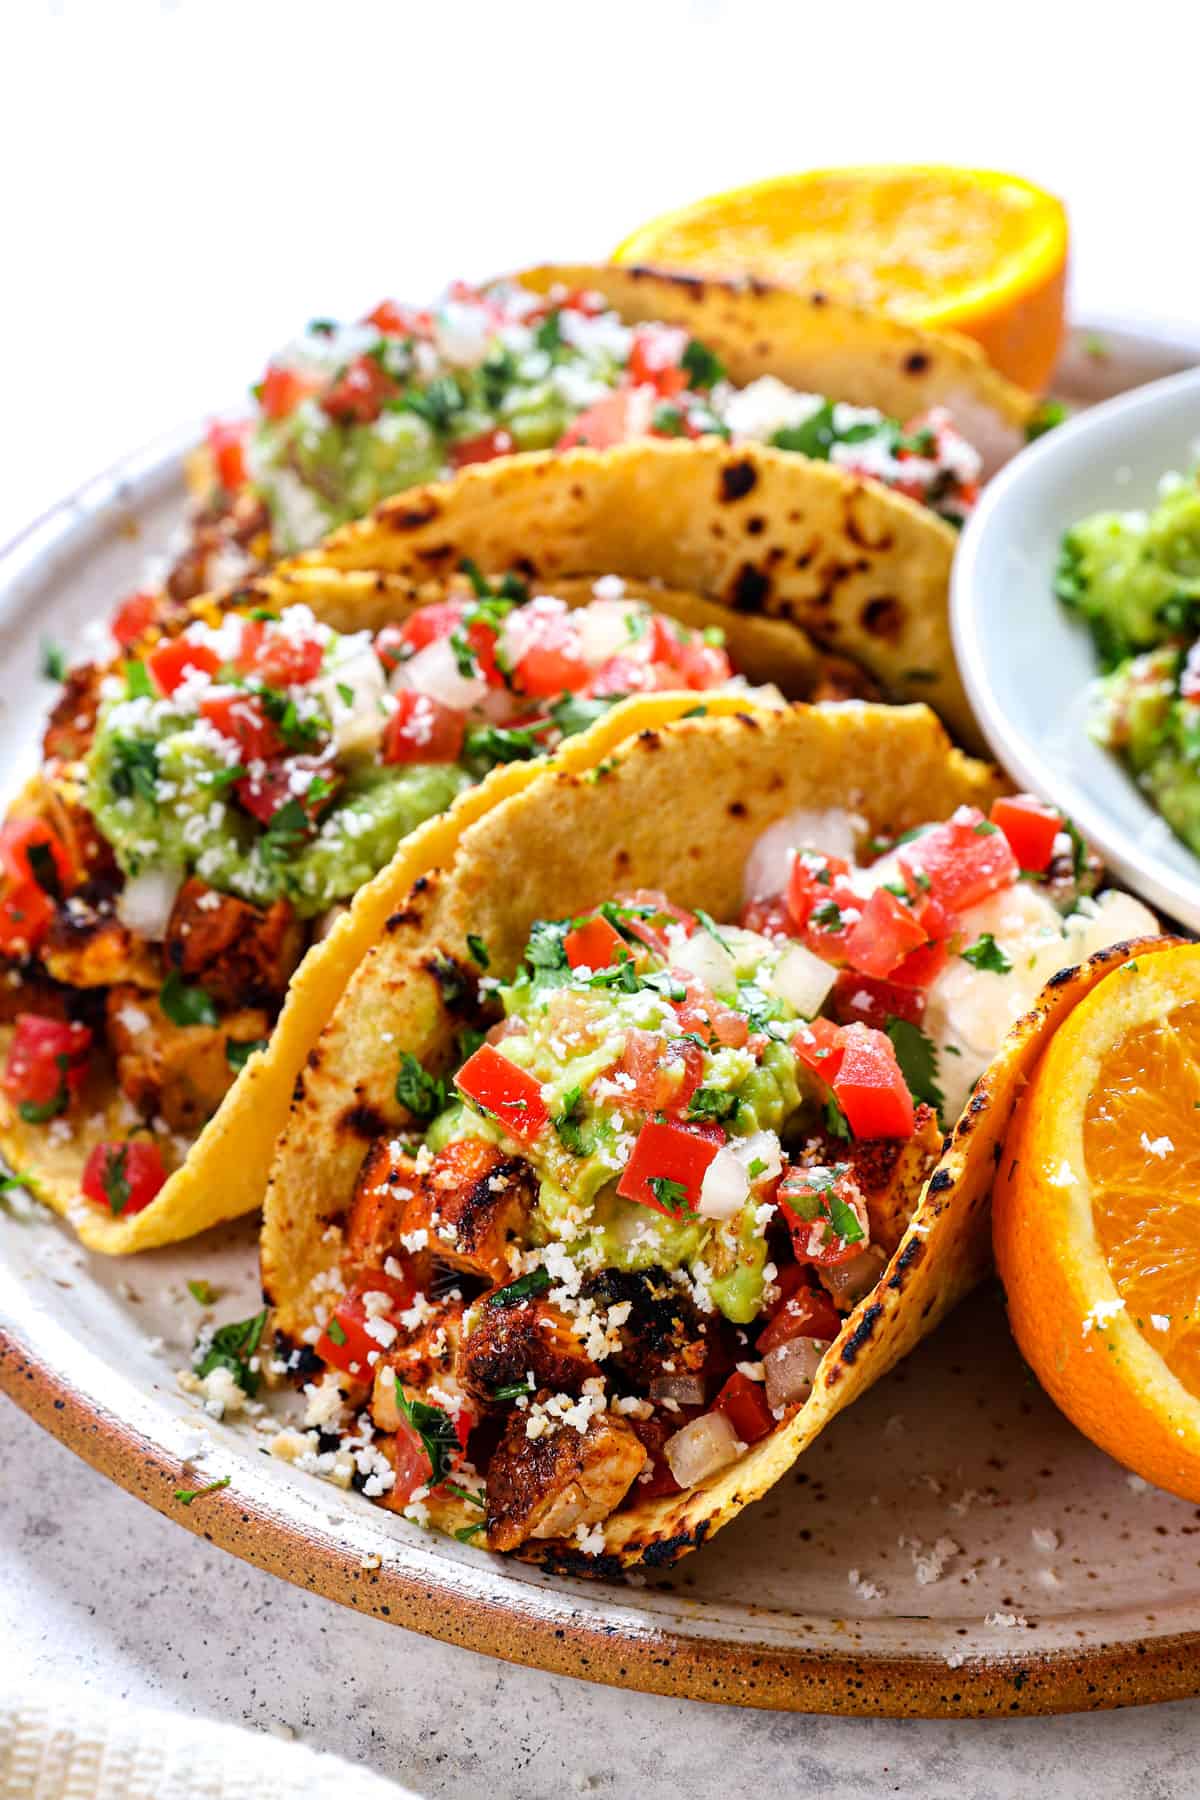 showing how to make chicken street tacos by adding chicken, guacamole and pico de gallo to a small corn tortilla